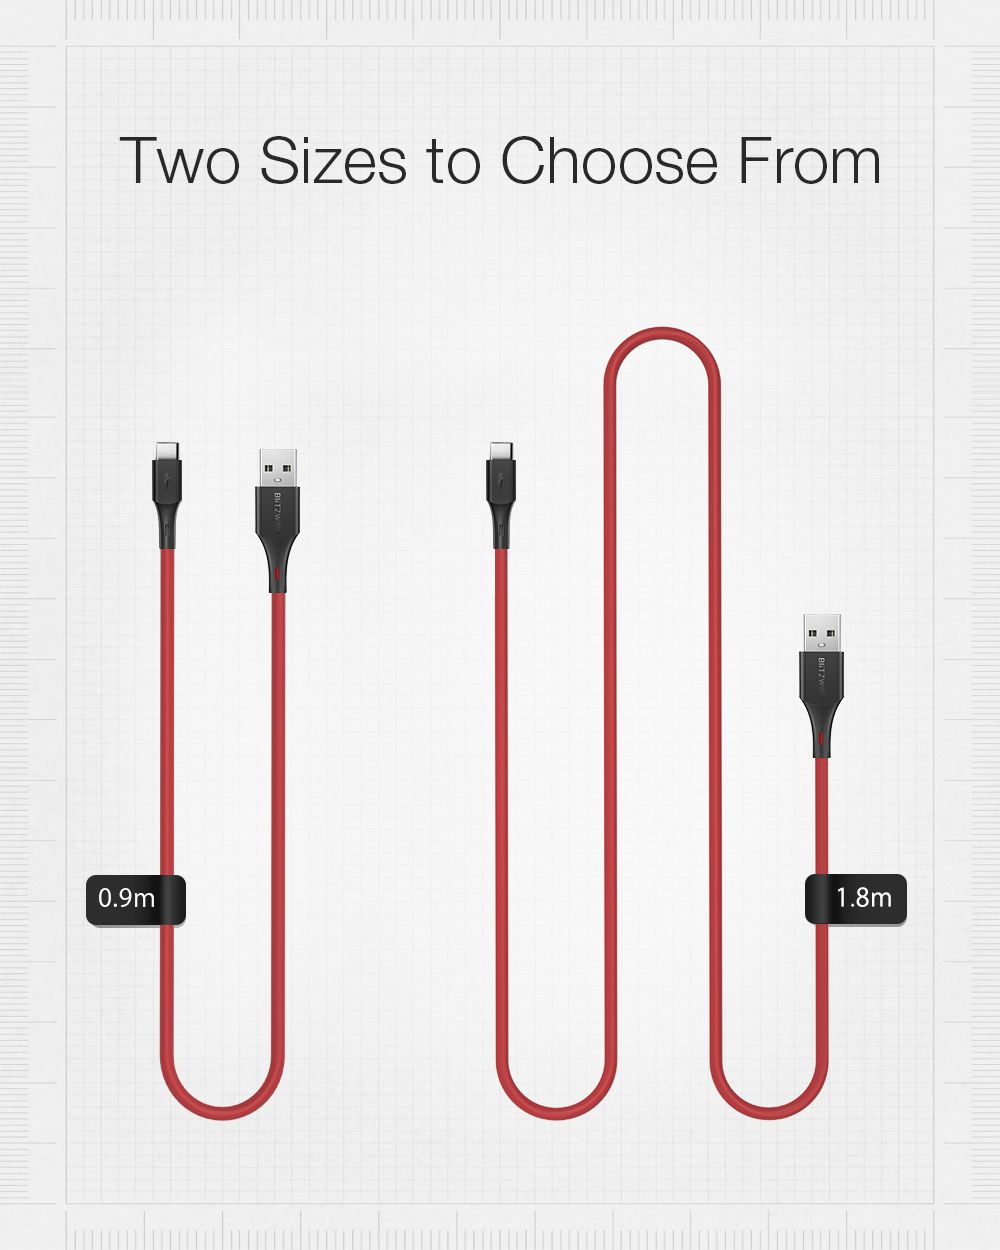 3-x-Blitzwolfreg-BW-TC19-5A-SuperCharge-QC30-USB-Type-C-Charging-Data-Cable-18m6ft-for-HUAWEI-P30-Pr-1590235